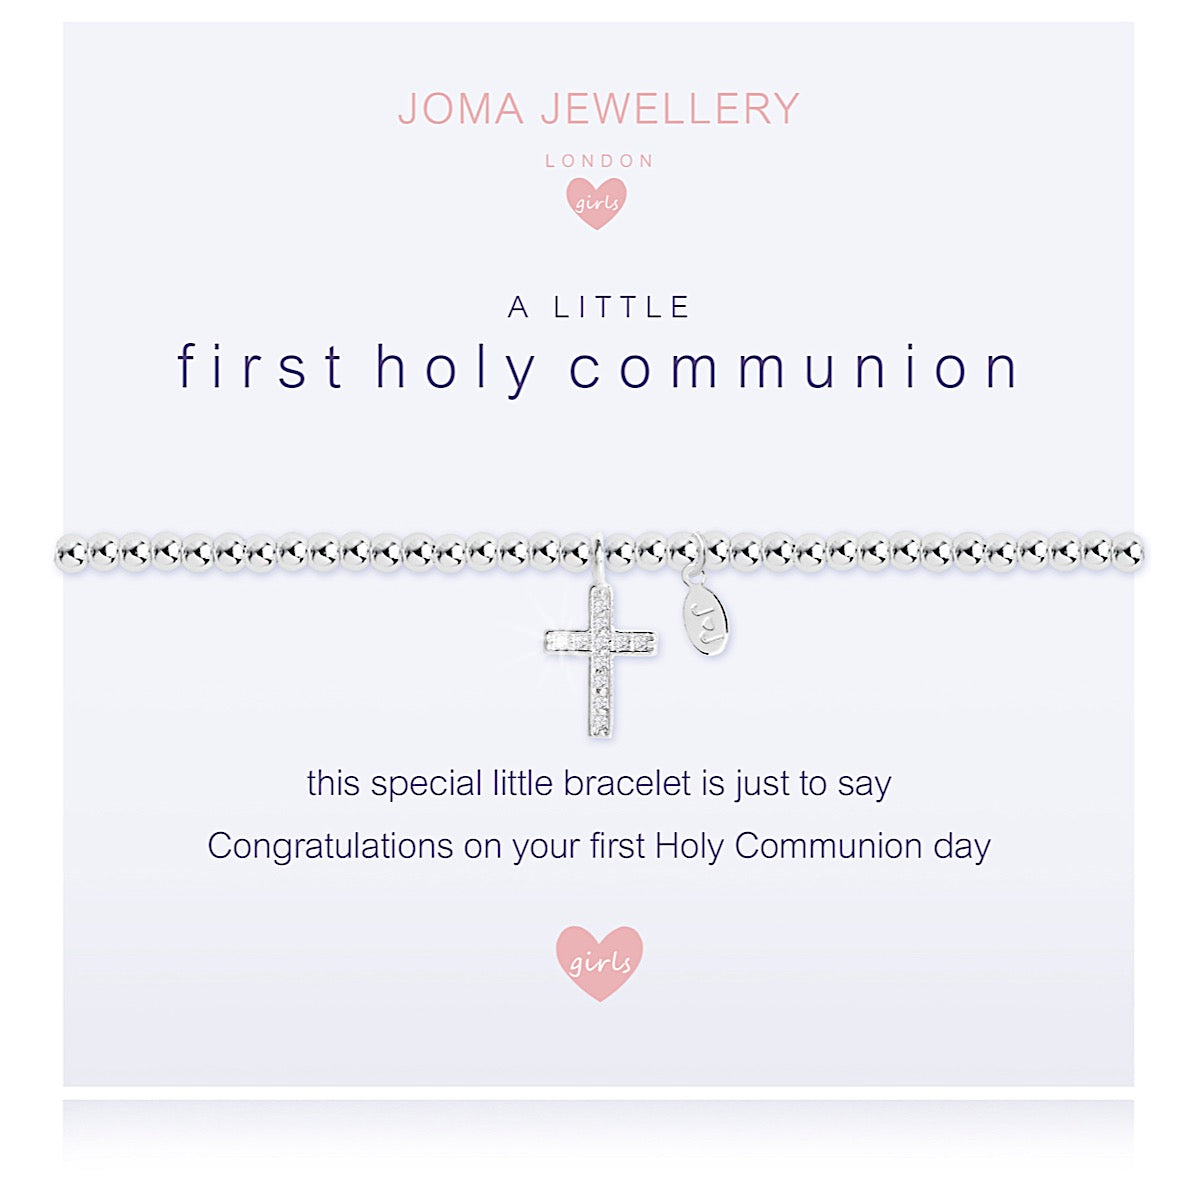 Joma Girls a little First Holy Communion Bracelet | More Than Just at Gift | Narborough Hall